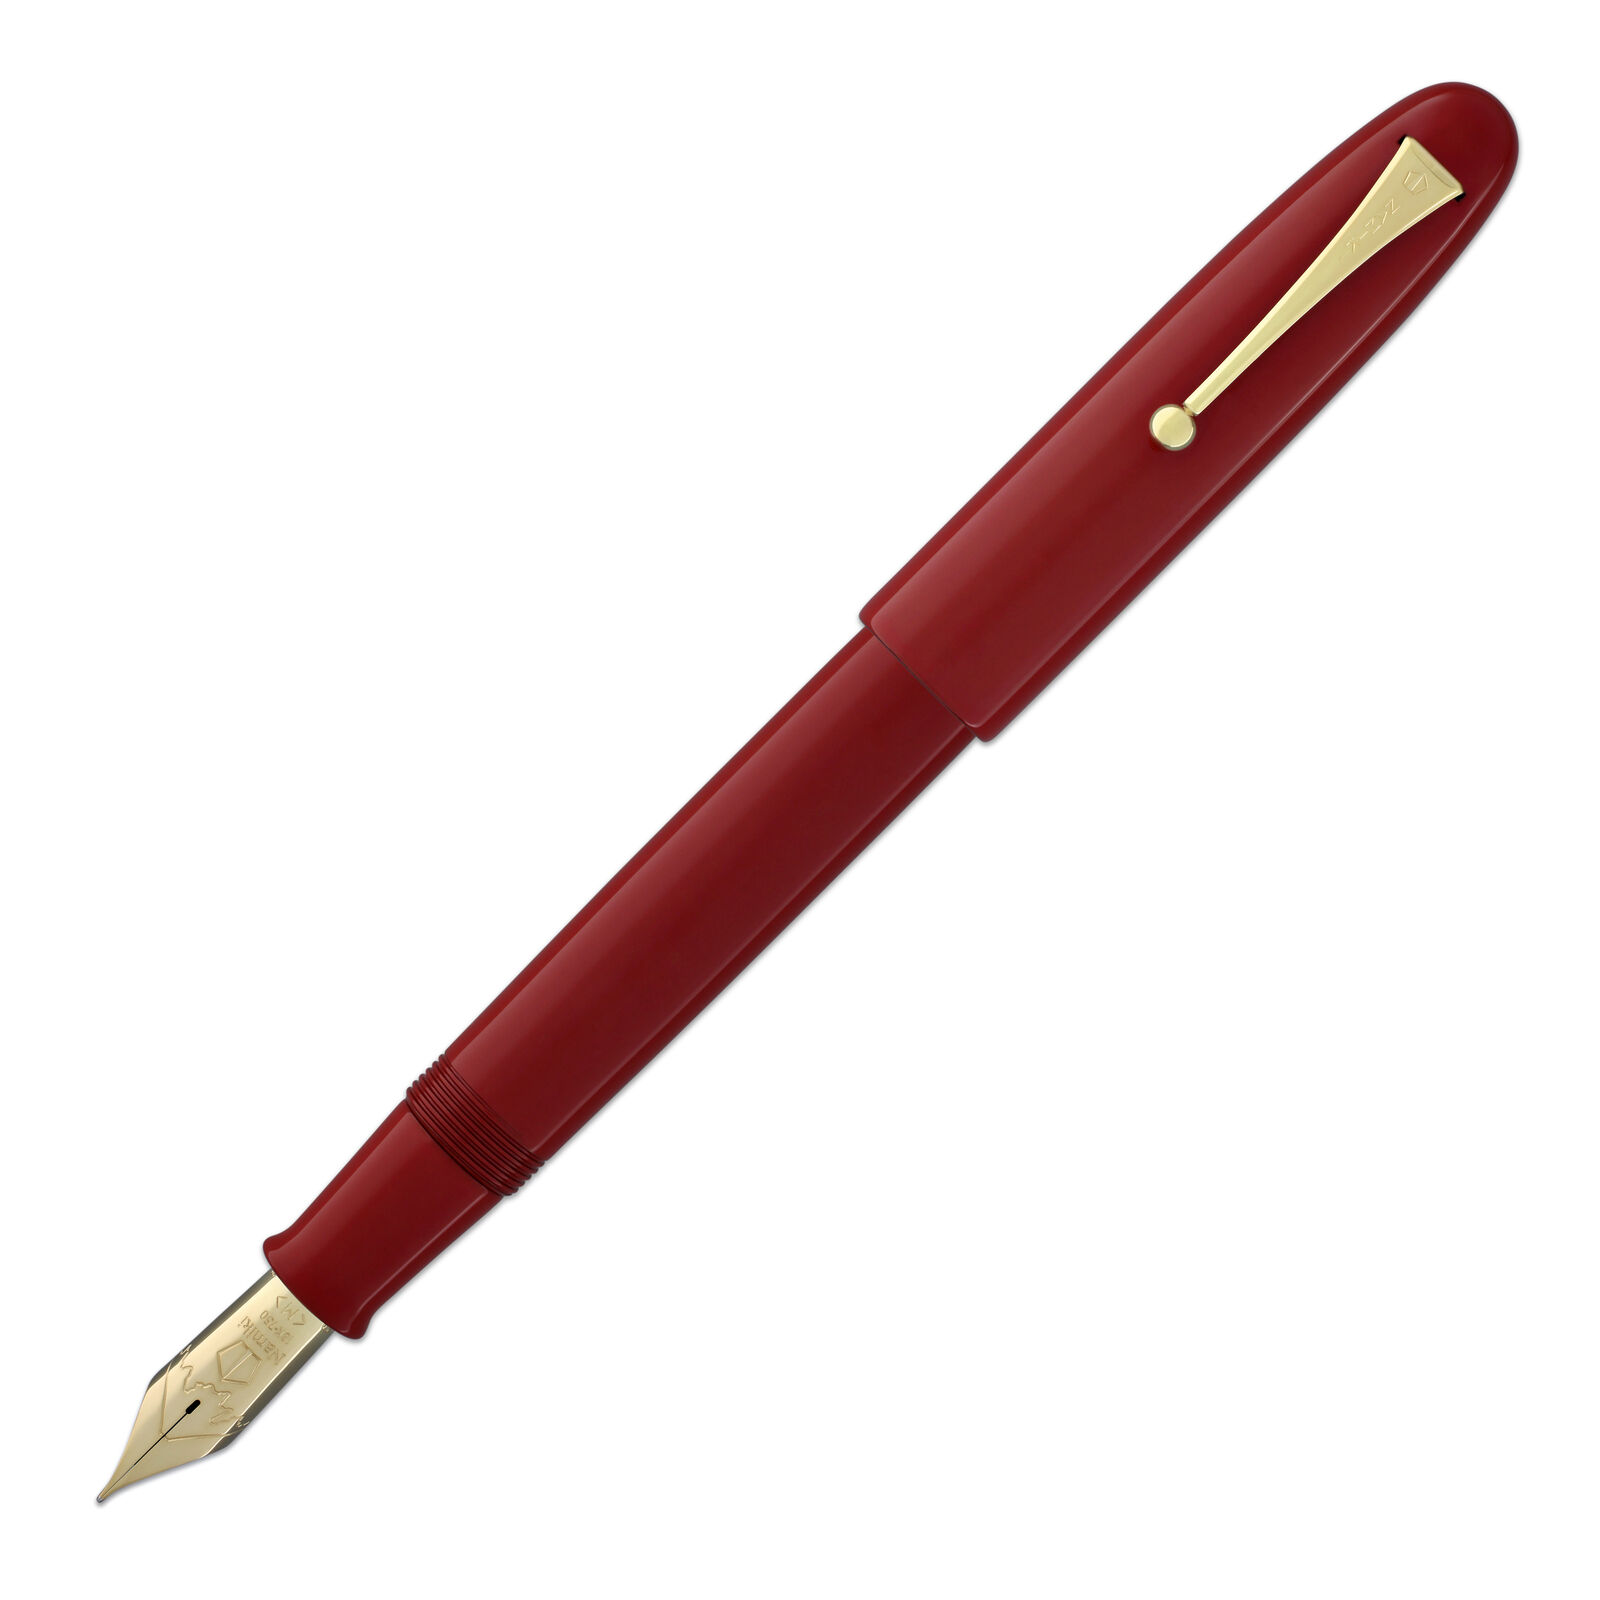 Namiki Emperor Urushi Fountain Pen - Vermilion Red - Broad Point NEW N60305